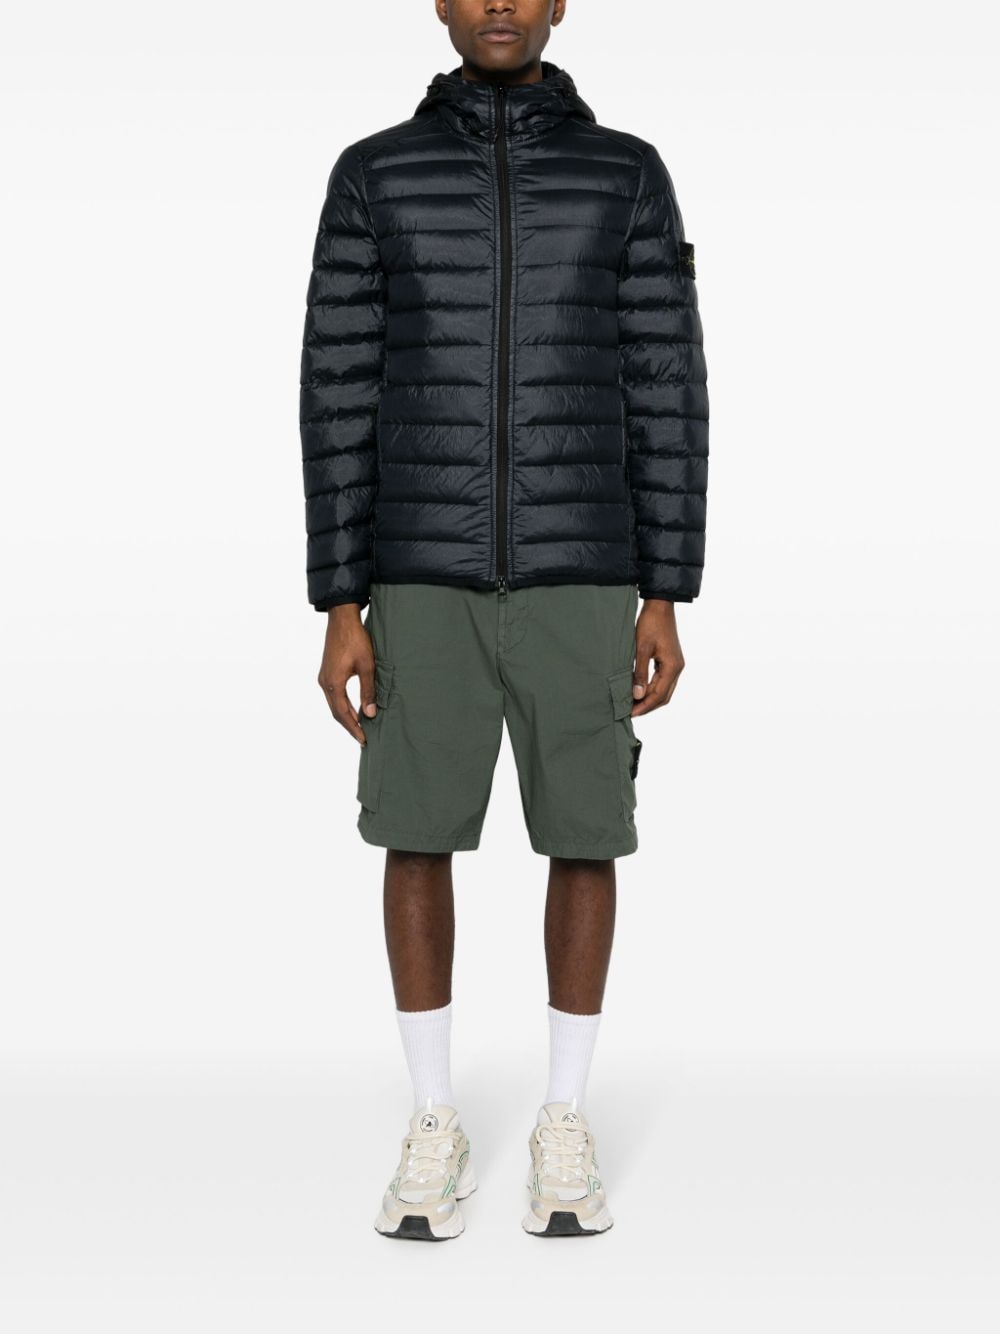 STONE ISLAND Hooded Down Jacket for Men in Navy - SS24 Collection